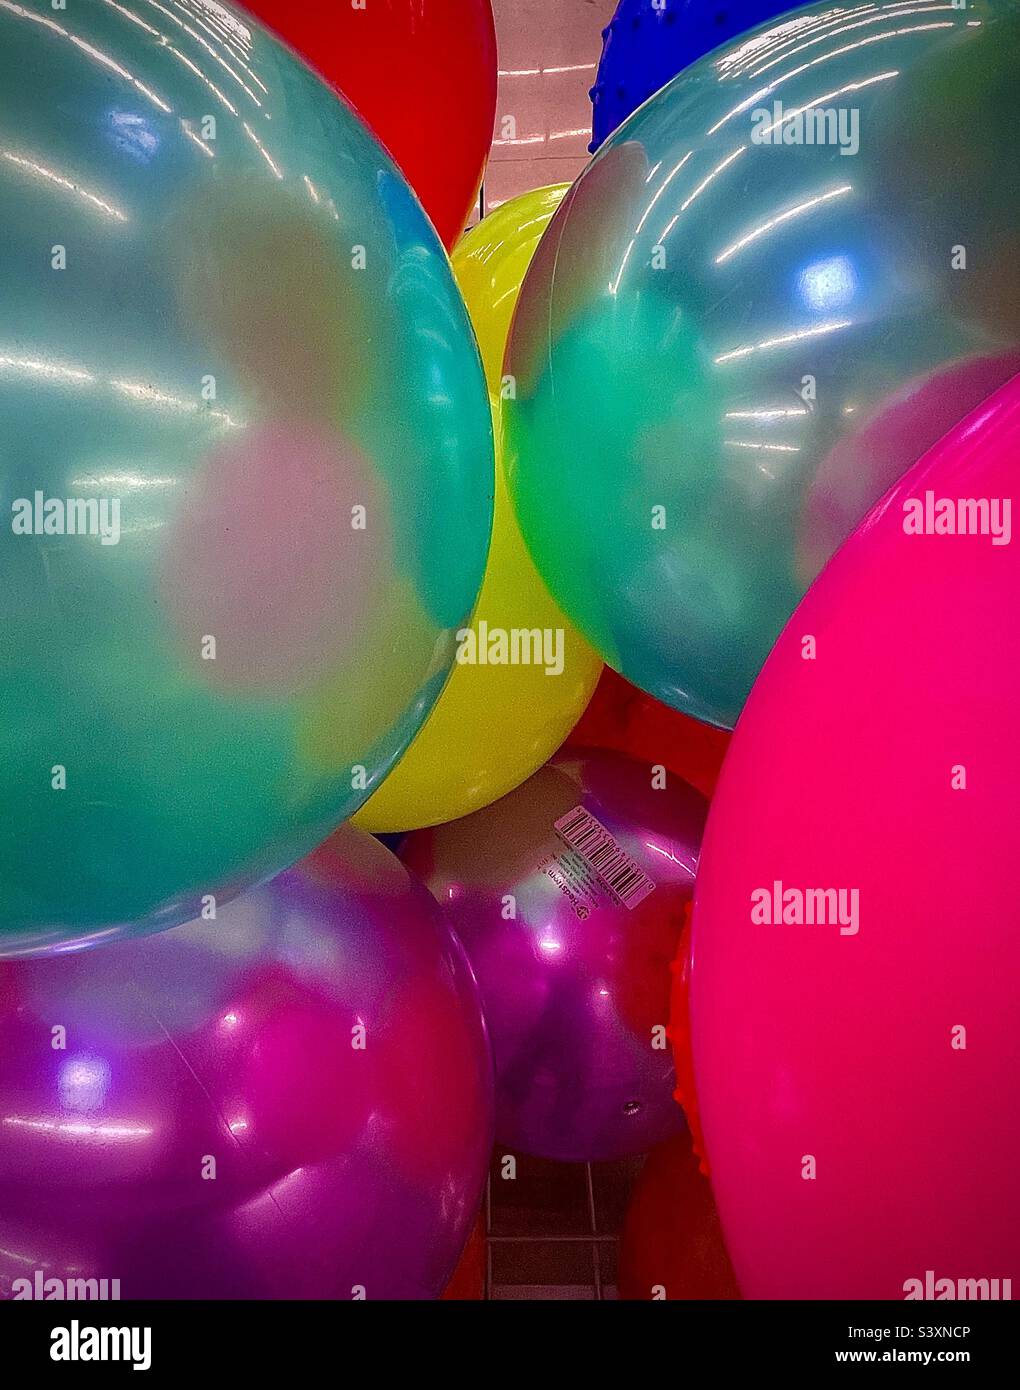 A bin of large colorful bouncy balls for kids at a local Utah, USA Walmart in the store’s toy section. Stock Photo